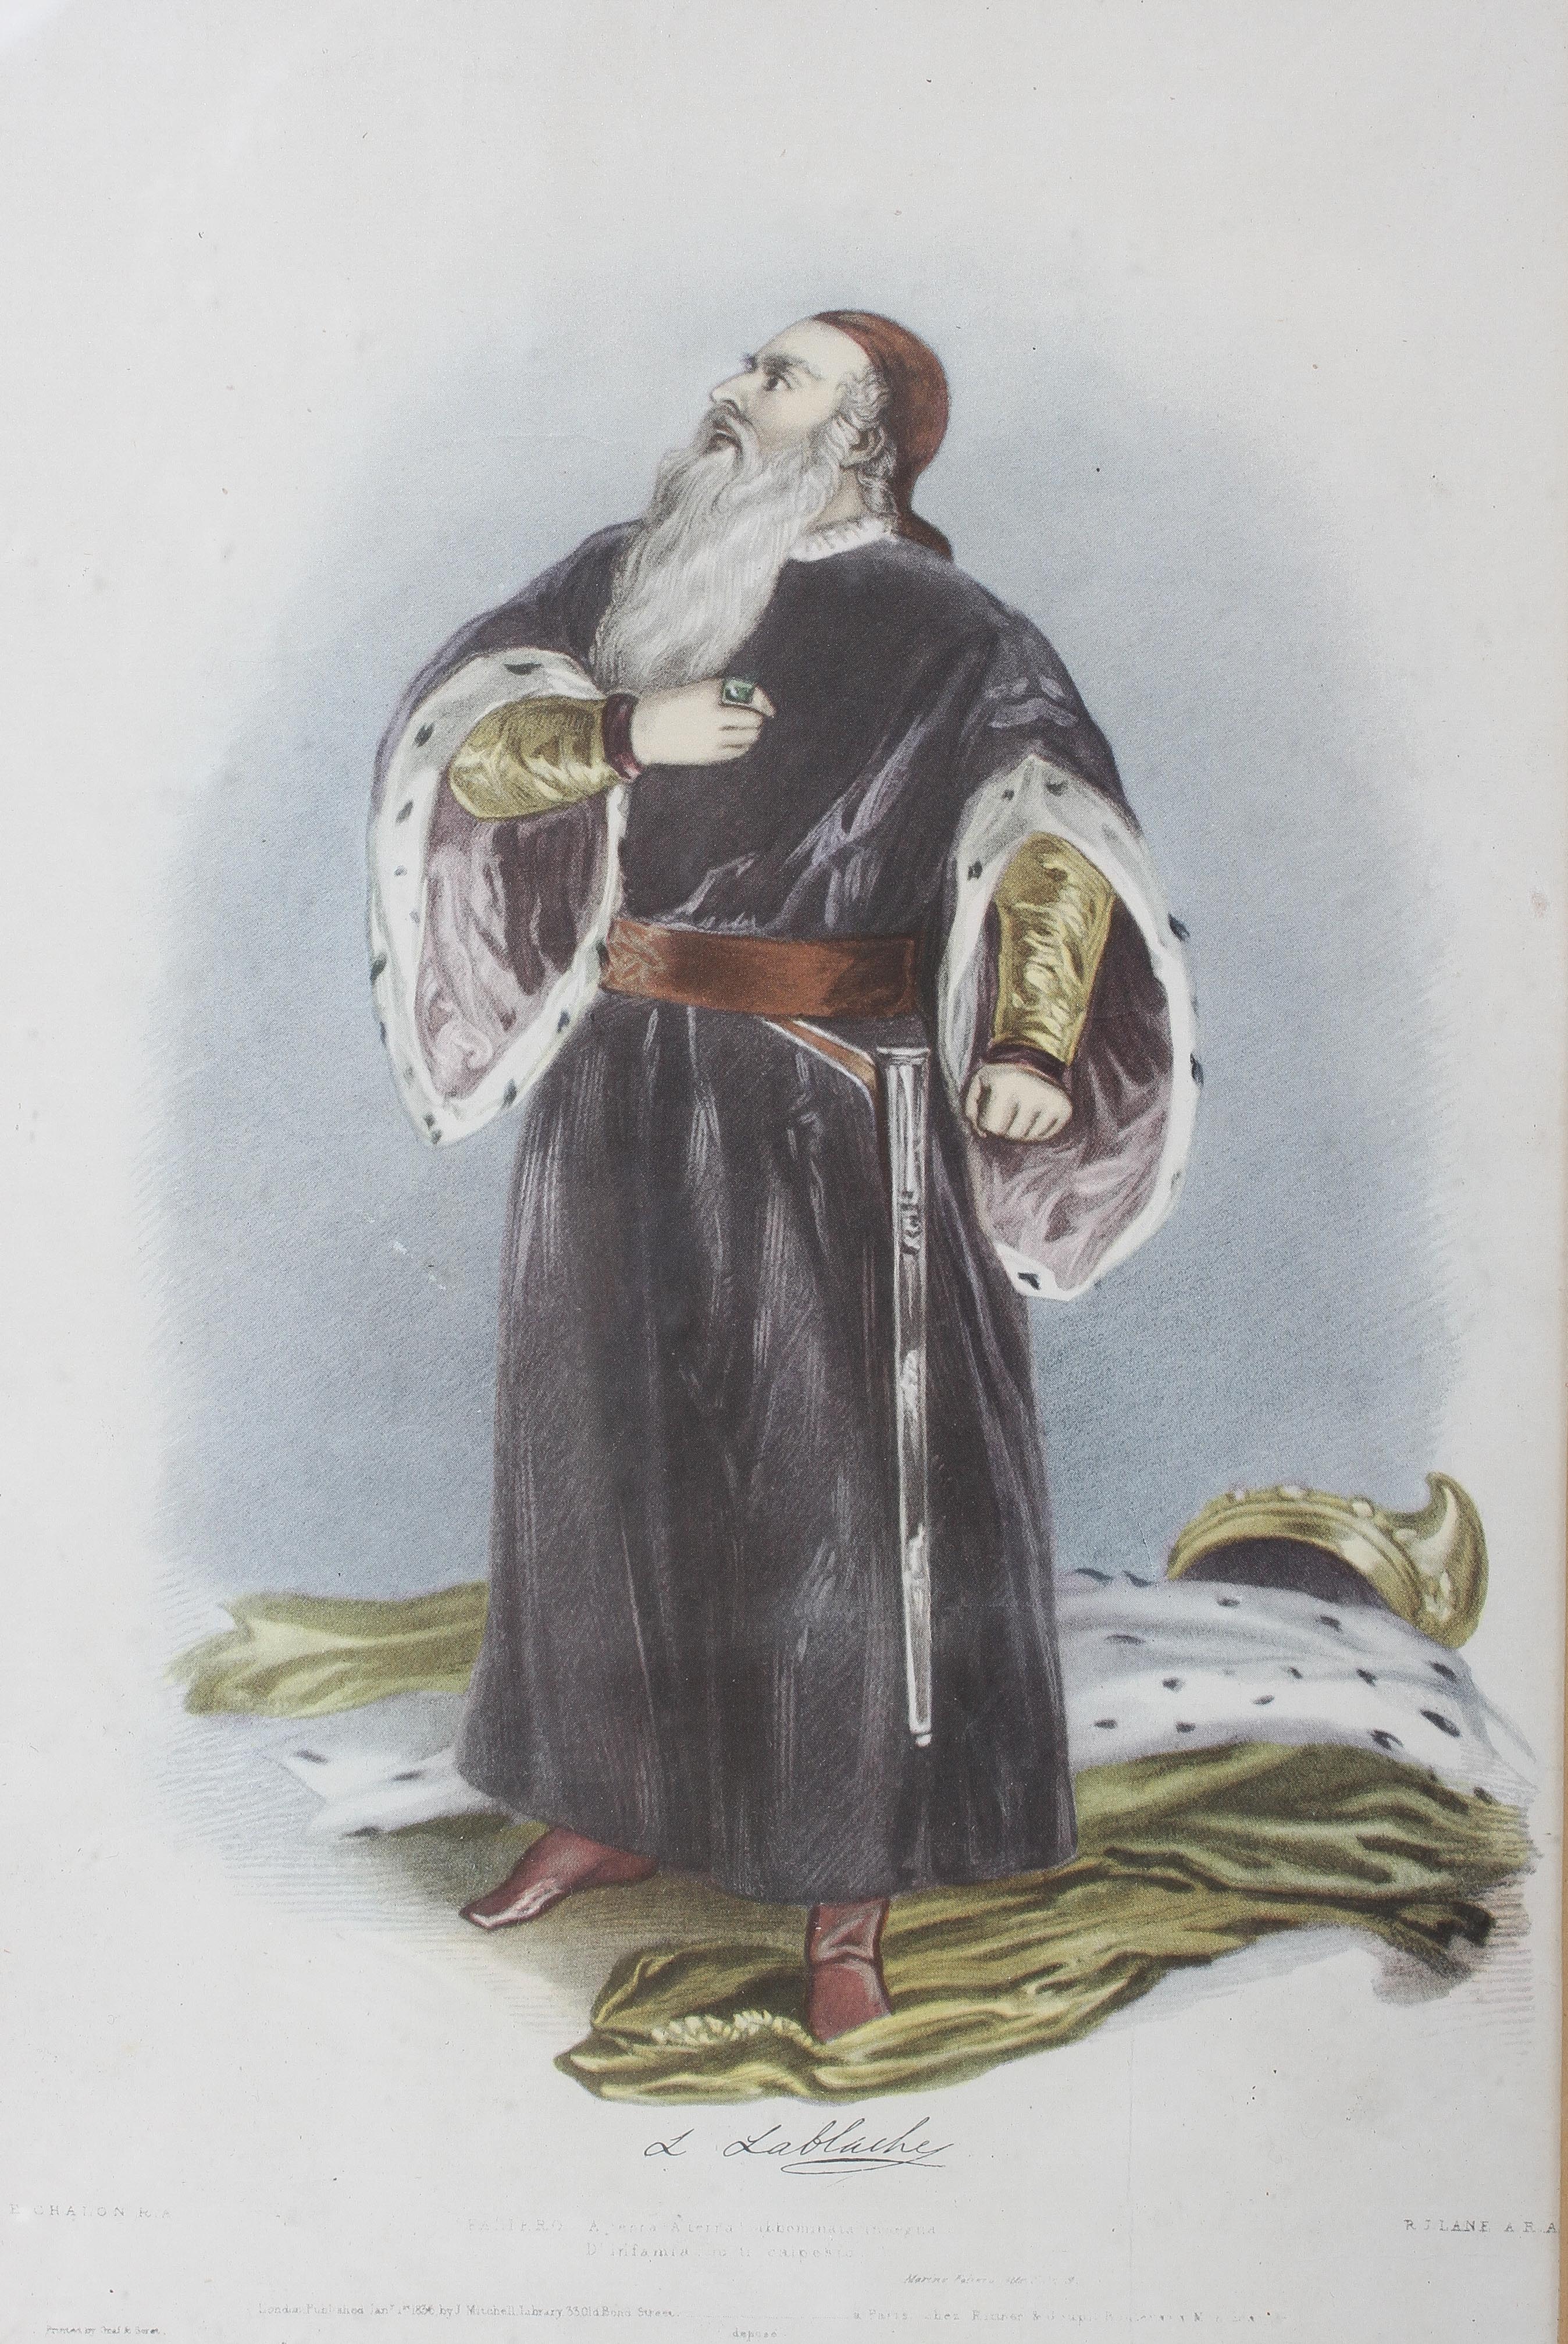 After William Drummond, Celeste as the Arab Boy, a coloured engraving, - Image 2 of 8